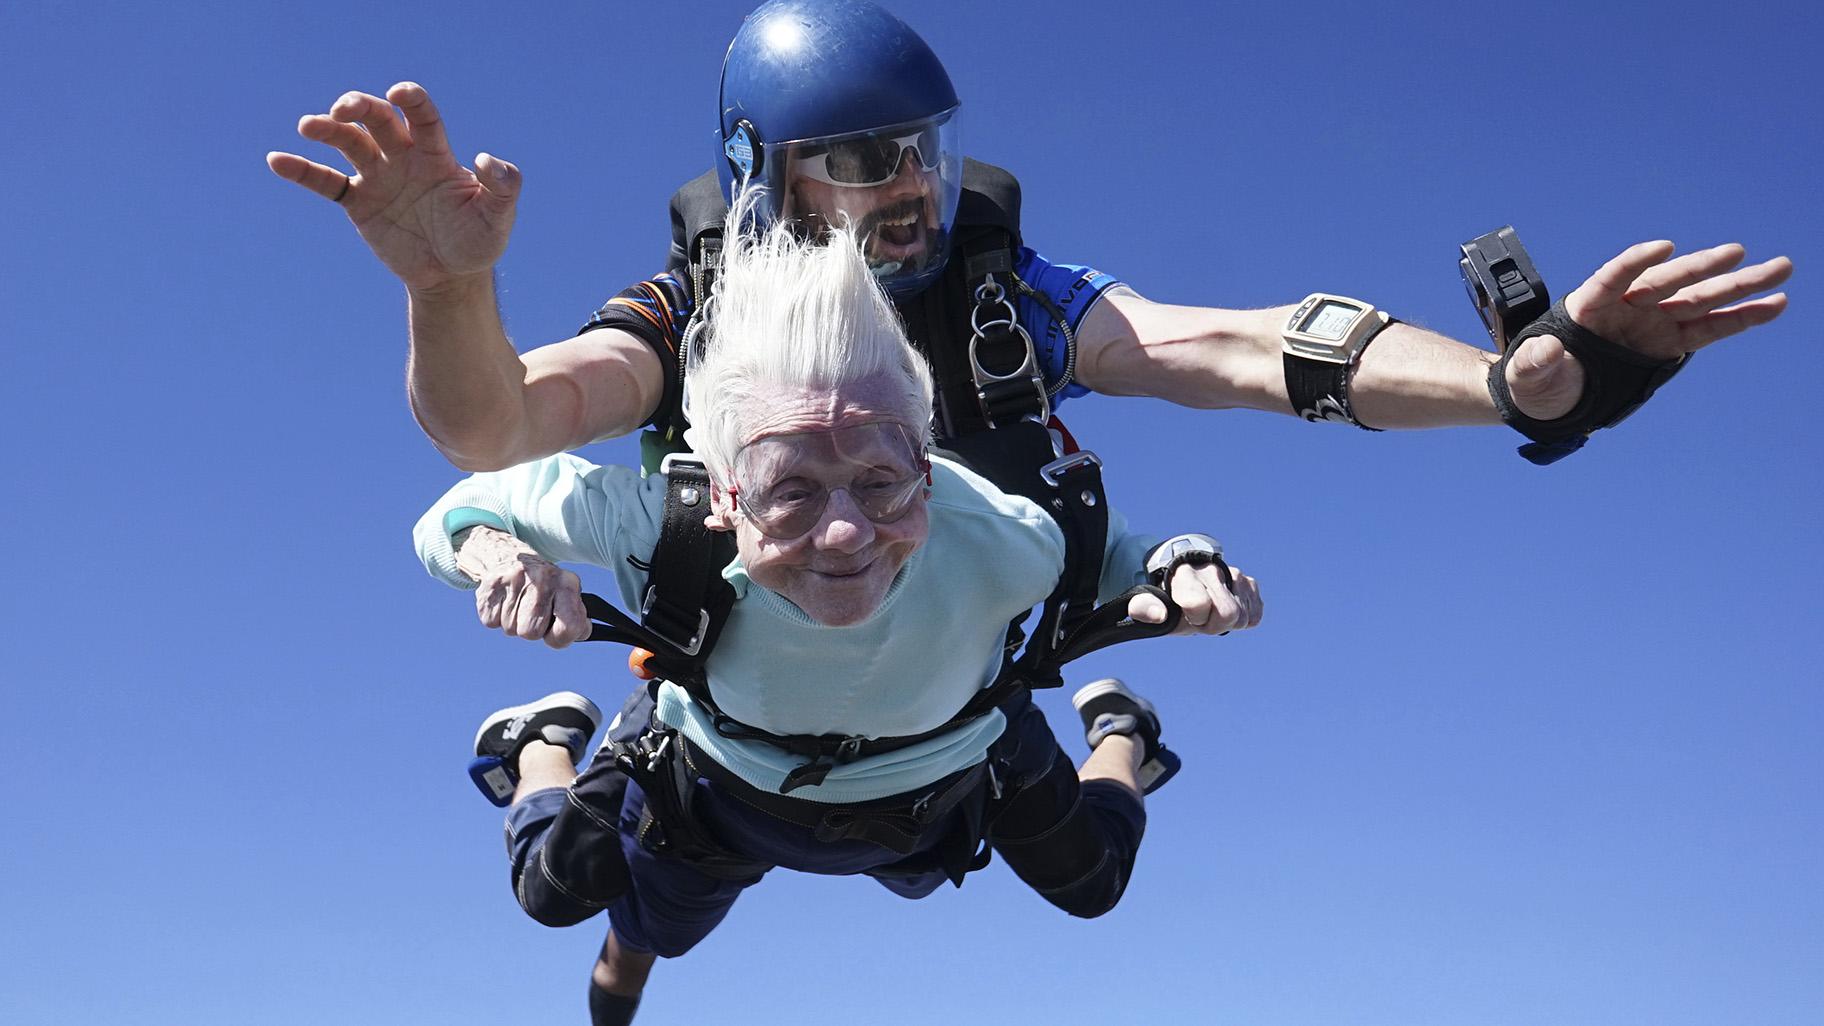 This photo provided by Daniel Wilsey shows Dorothy Hoffner, 104, falling through the air with tandem jumper Derek Baxter as she becomes the oldest person in the world to skydive, Sunday, Oct. 1, 2023, at Skydive Chicago in Ottawa, Ill. (Daniel Wilsey via AP, File)